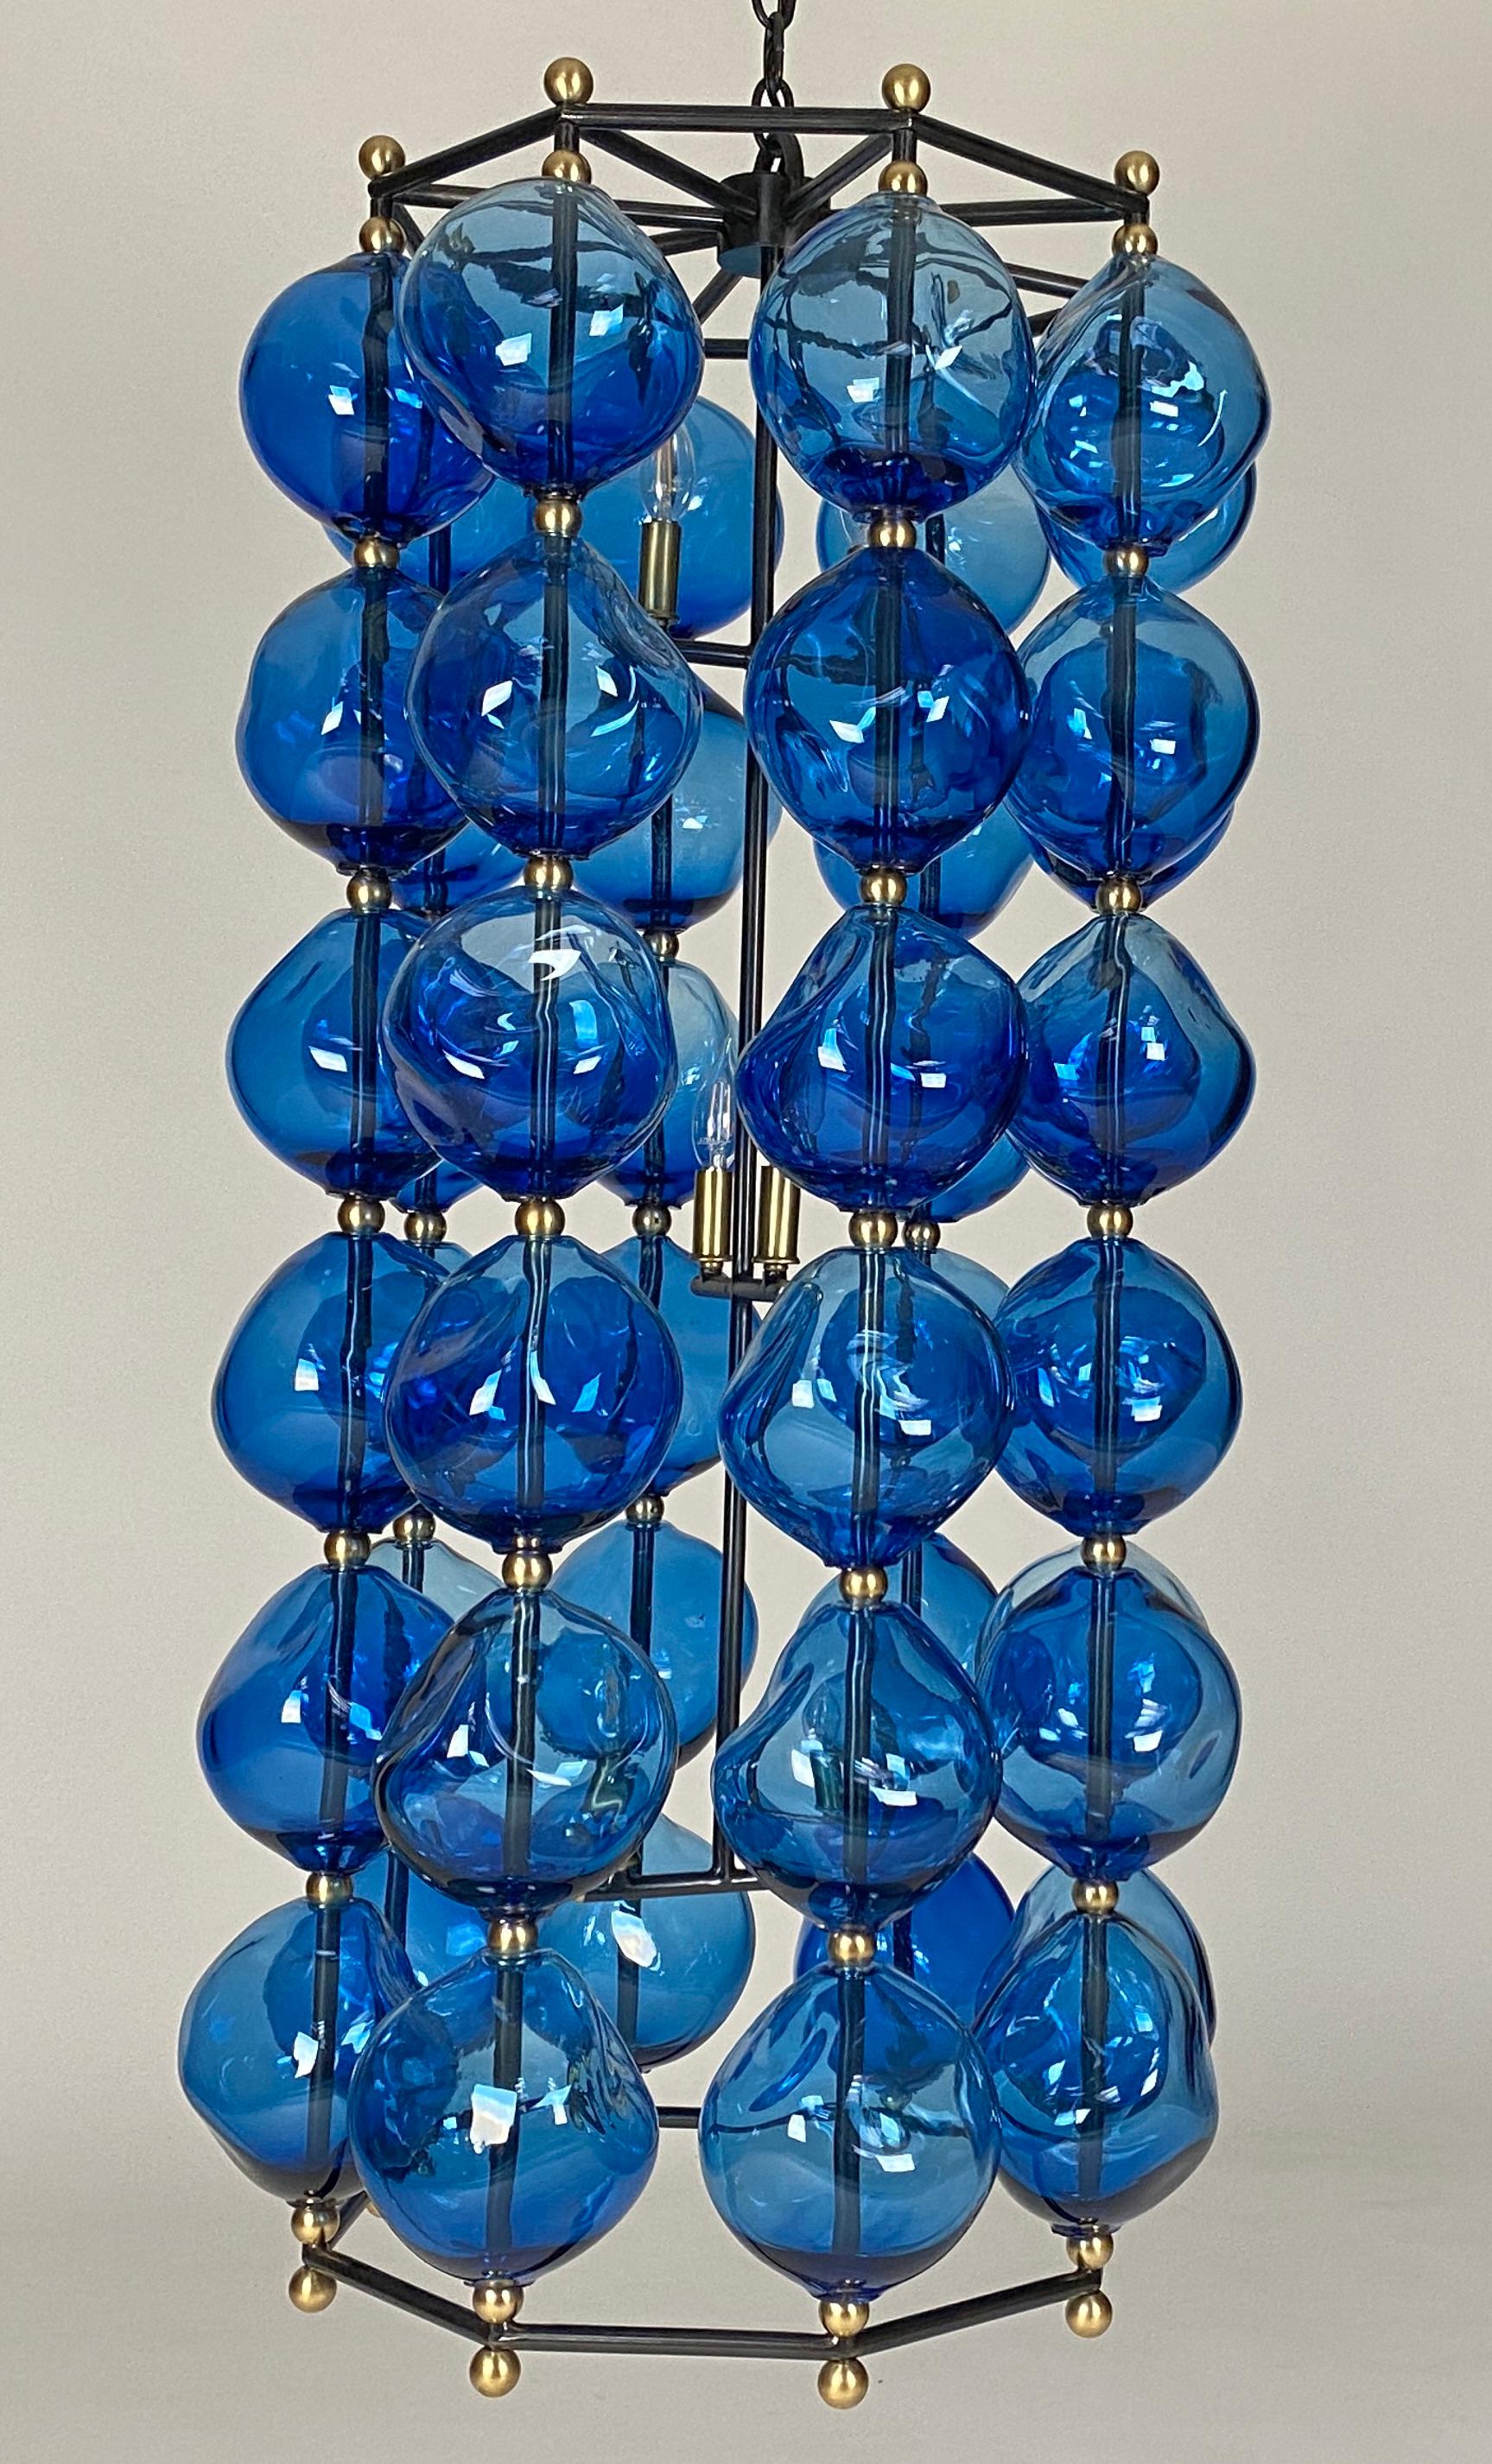 Steel and hand blown glass chandelier. 48 Aqua blue glass stones. Gun metal steel frame and brass accents. 4 Candelabras base sockets.
Custom sizes available.